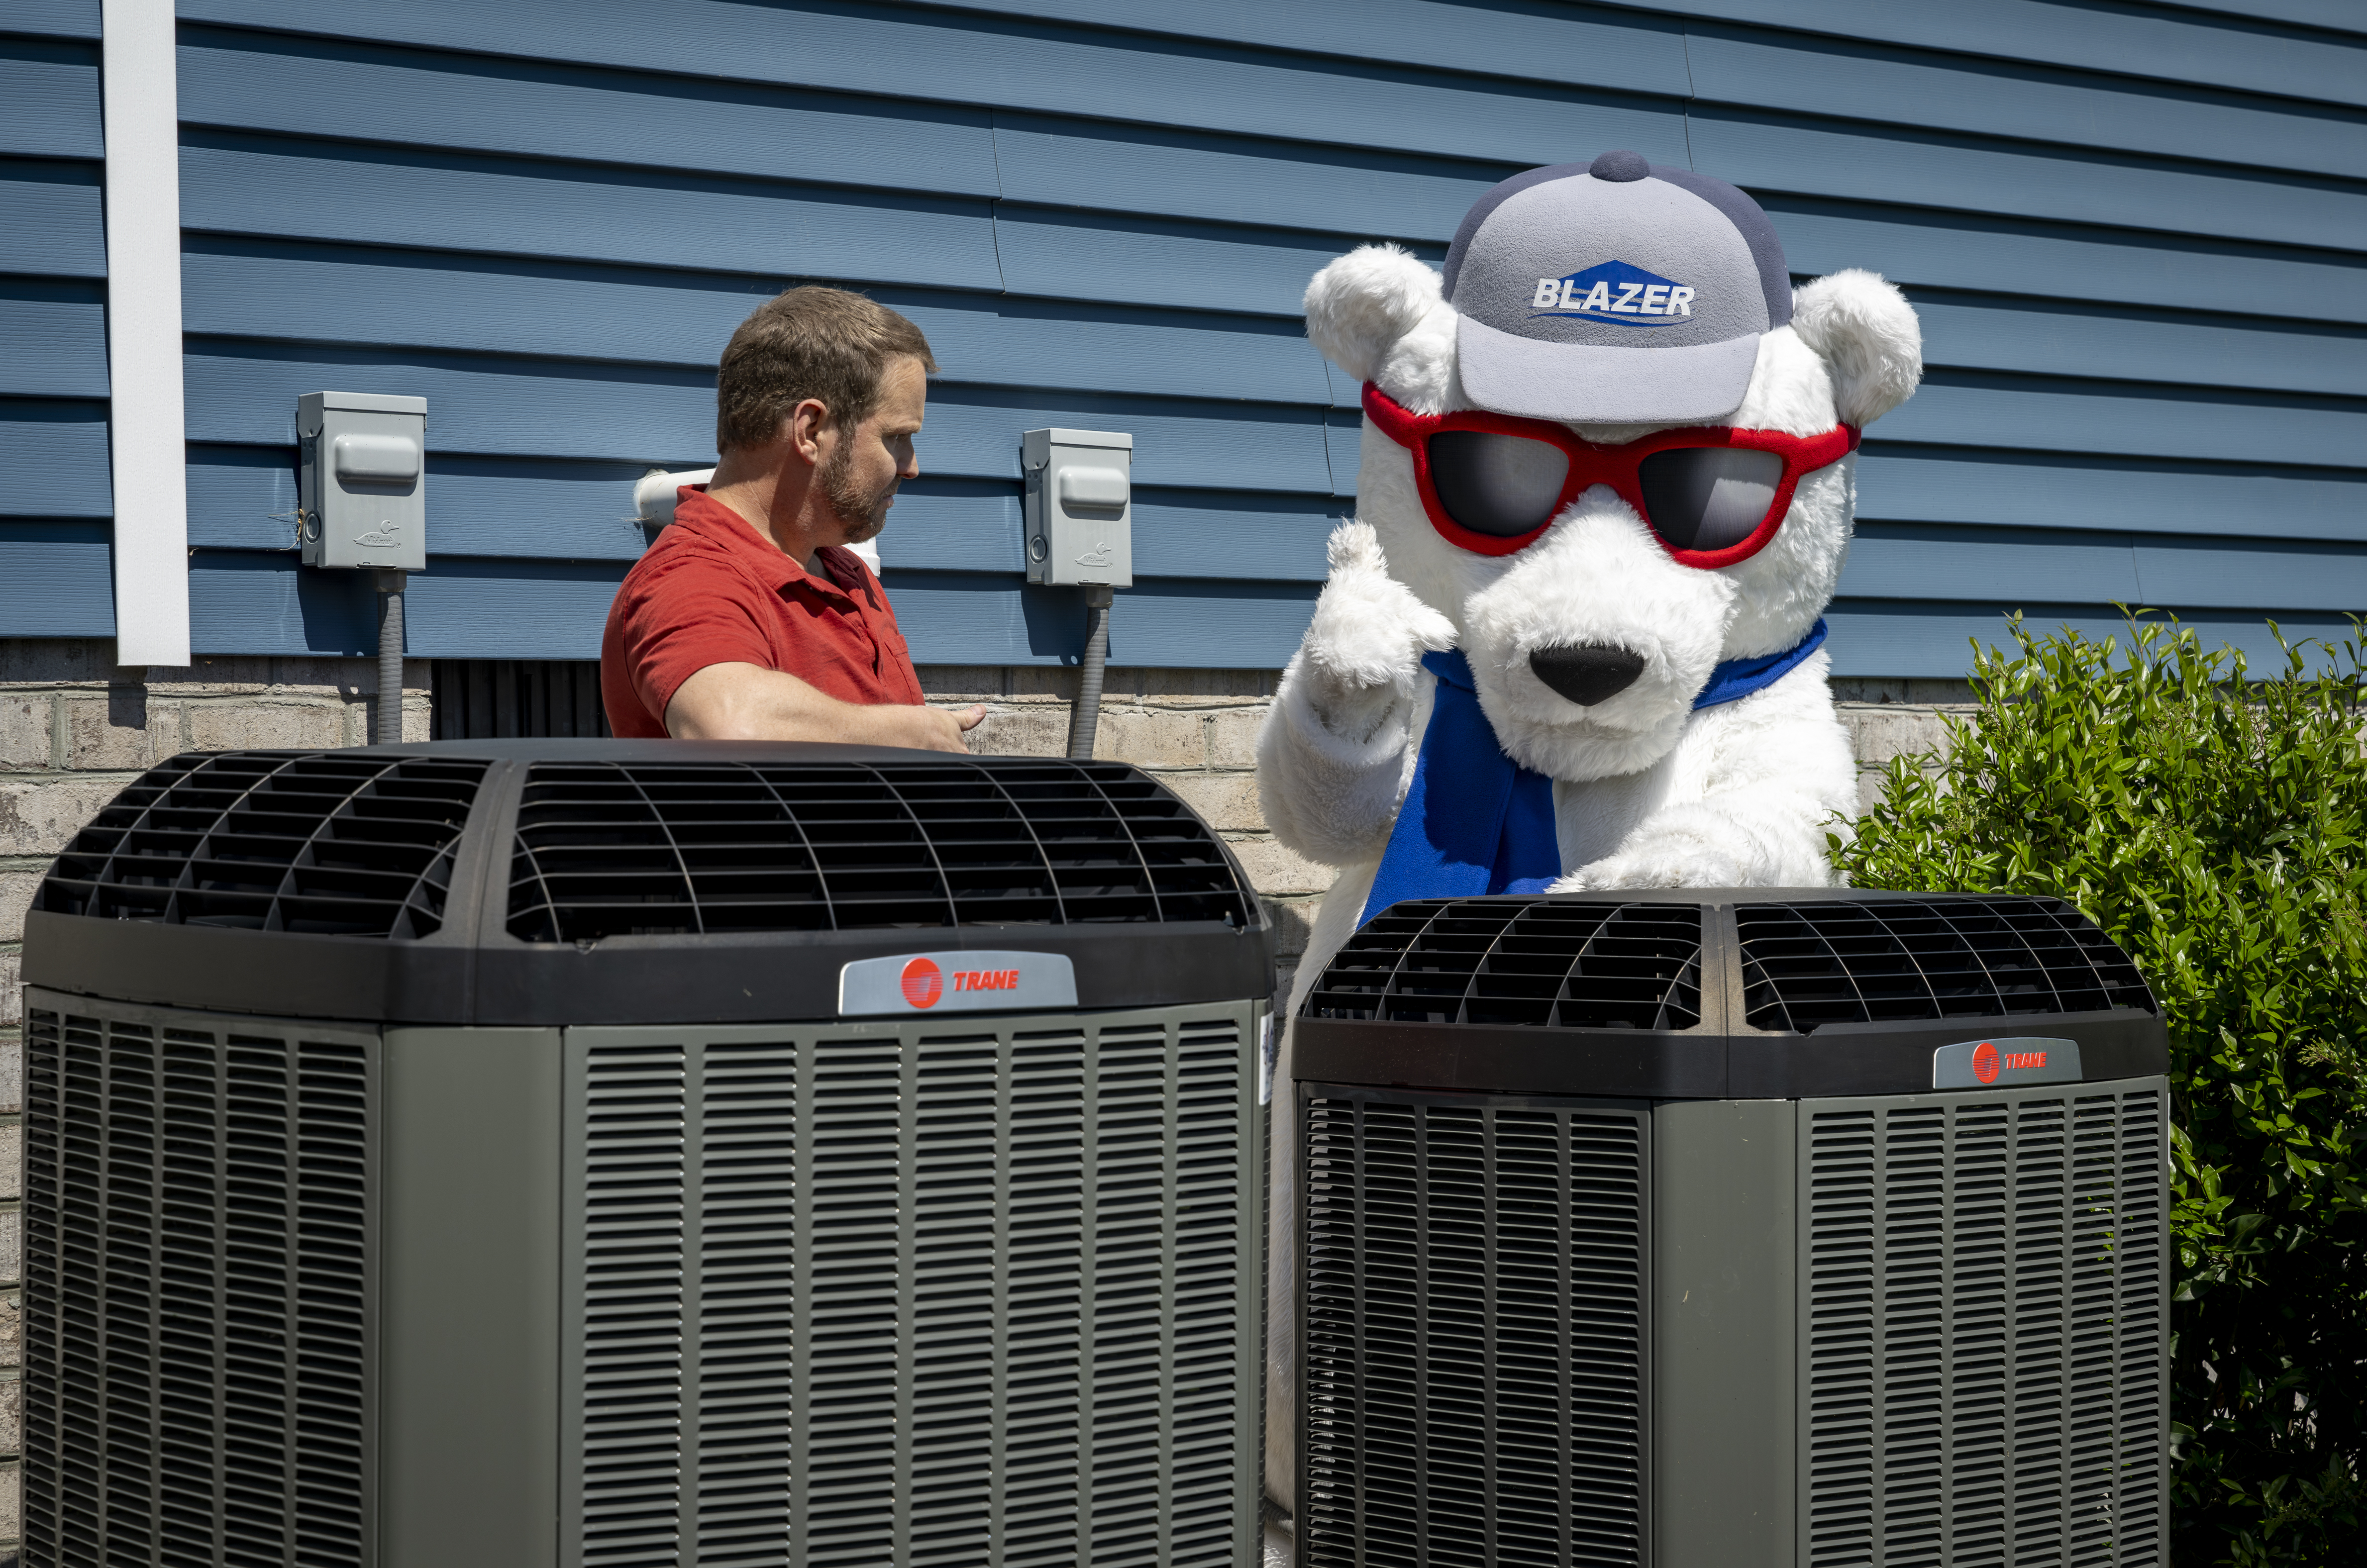 Blaze the Bear and tech looking at ac units